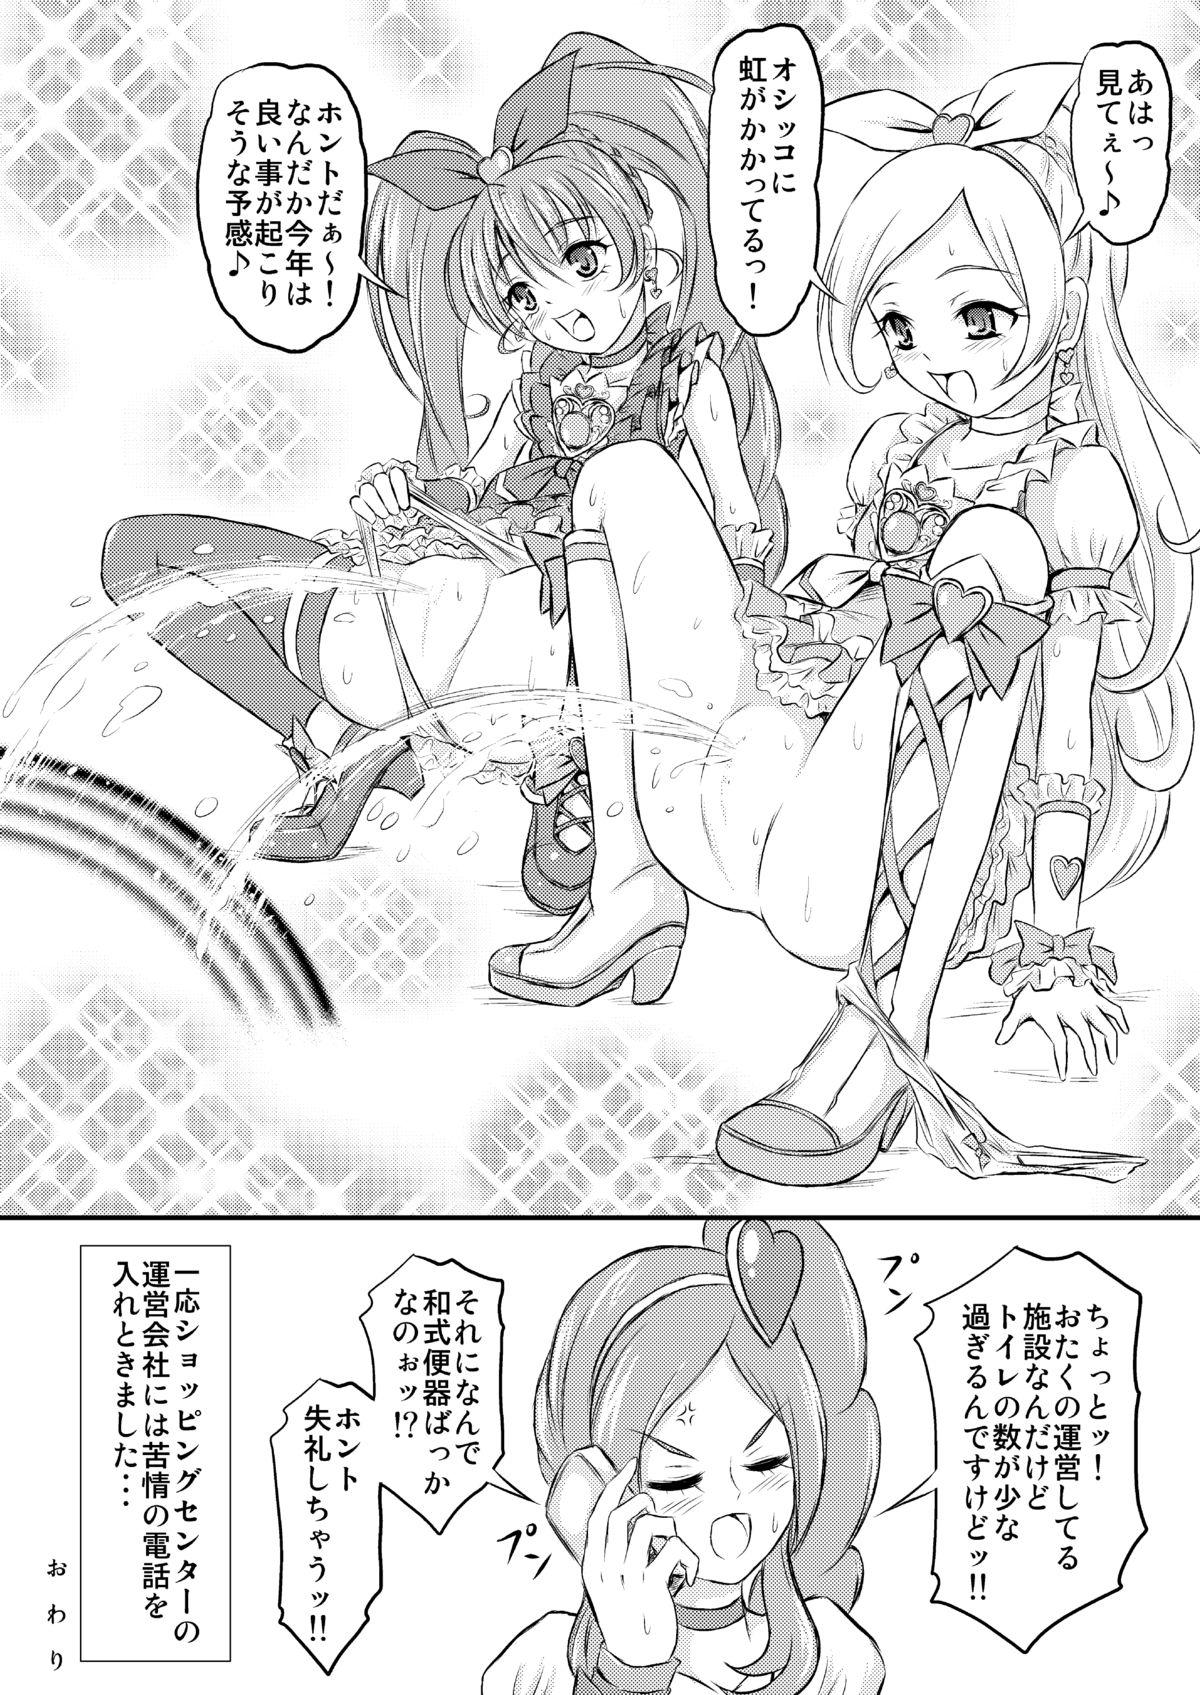 Stepdaughter Omorashi All-Stars DX - Pretty cure Outside - Page 21